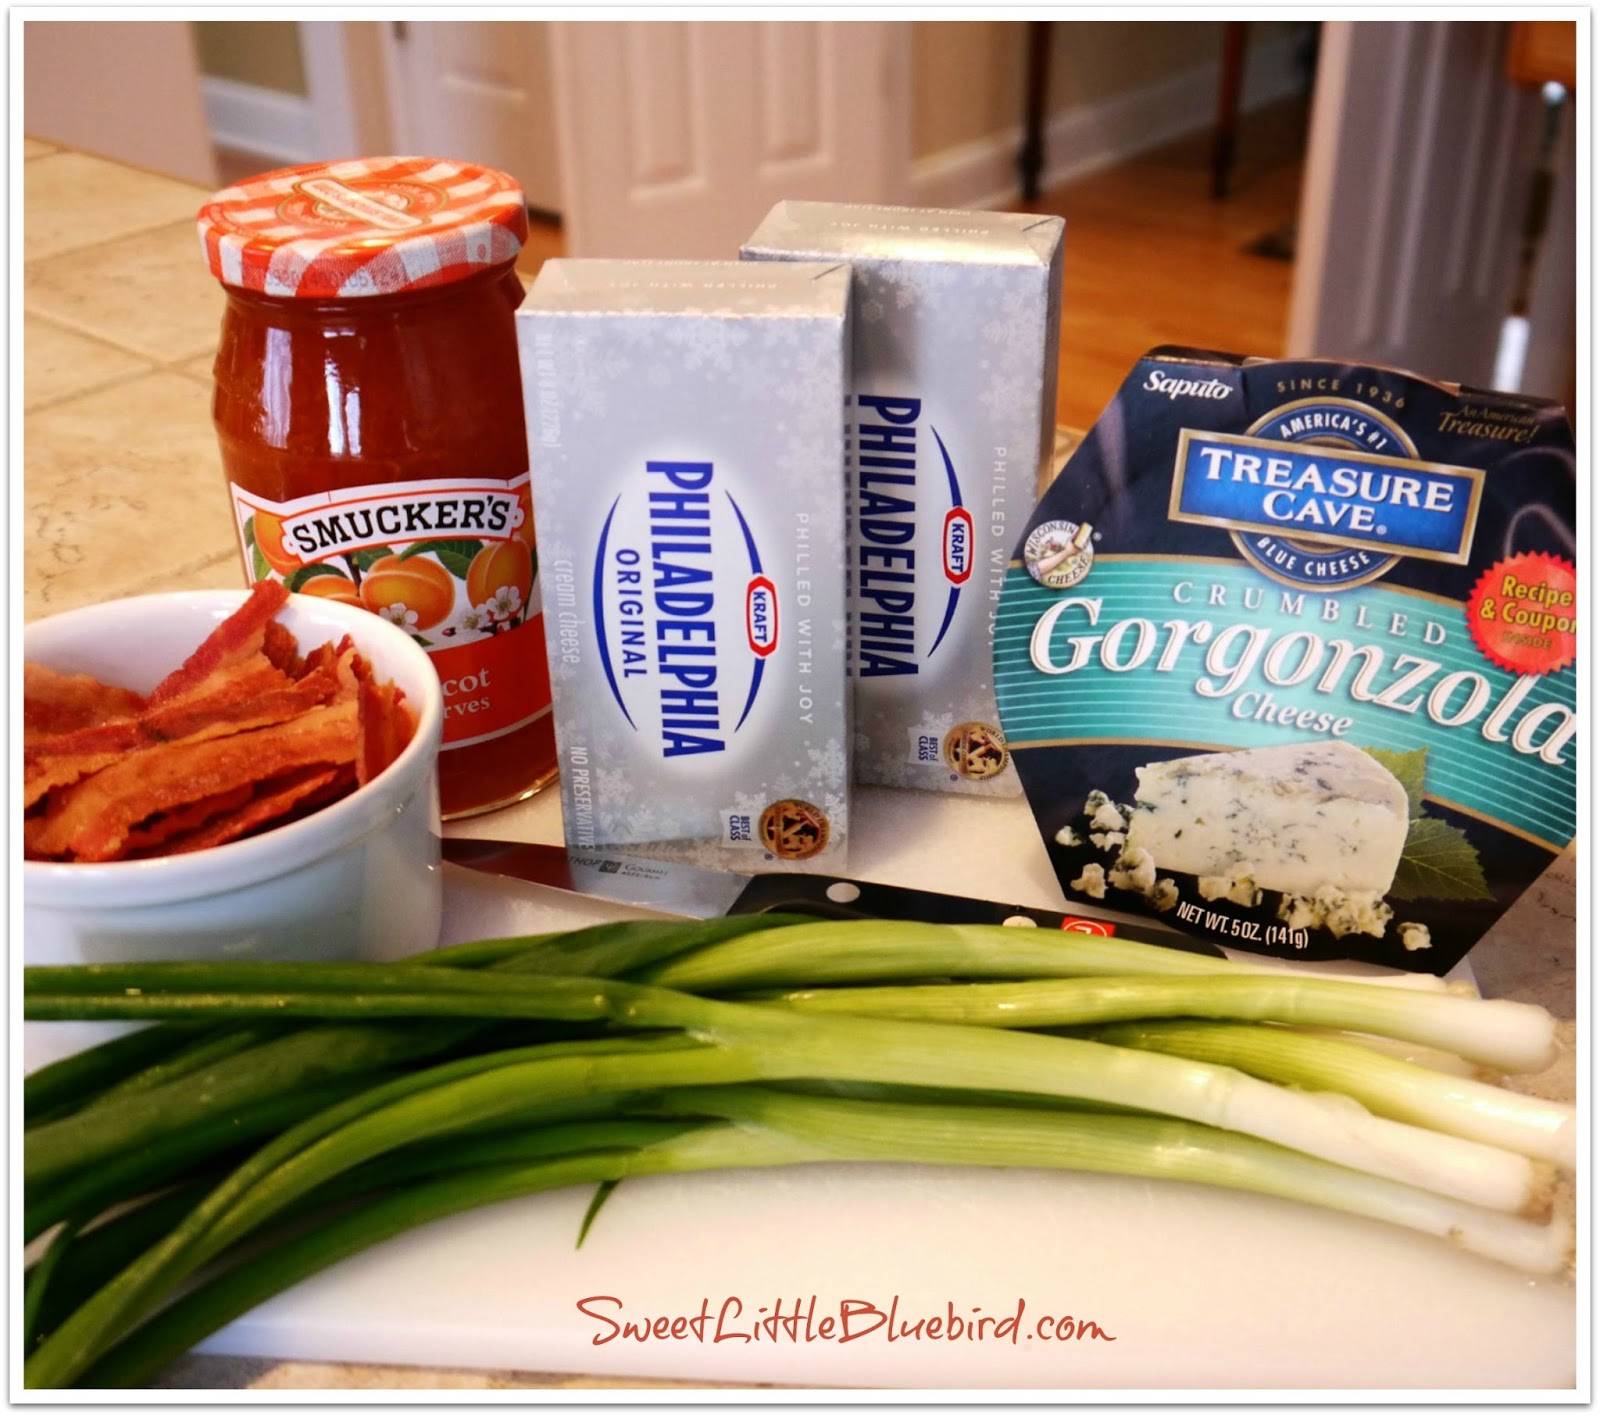 This photo shows the ingredients to make Apricot Gorgonzola Cheese on a kitchen Counter - cream cheese, bacon, apricot preserves, gorgonzola and green onion. 